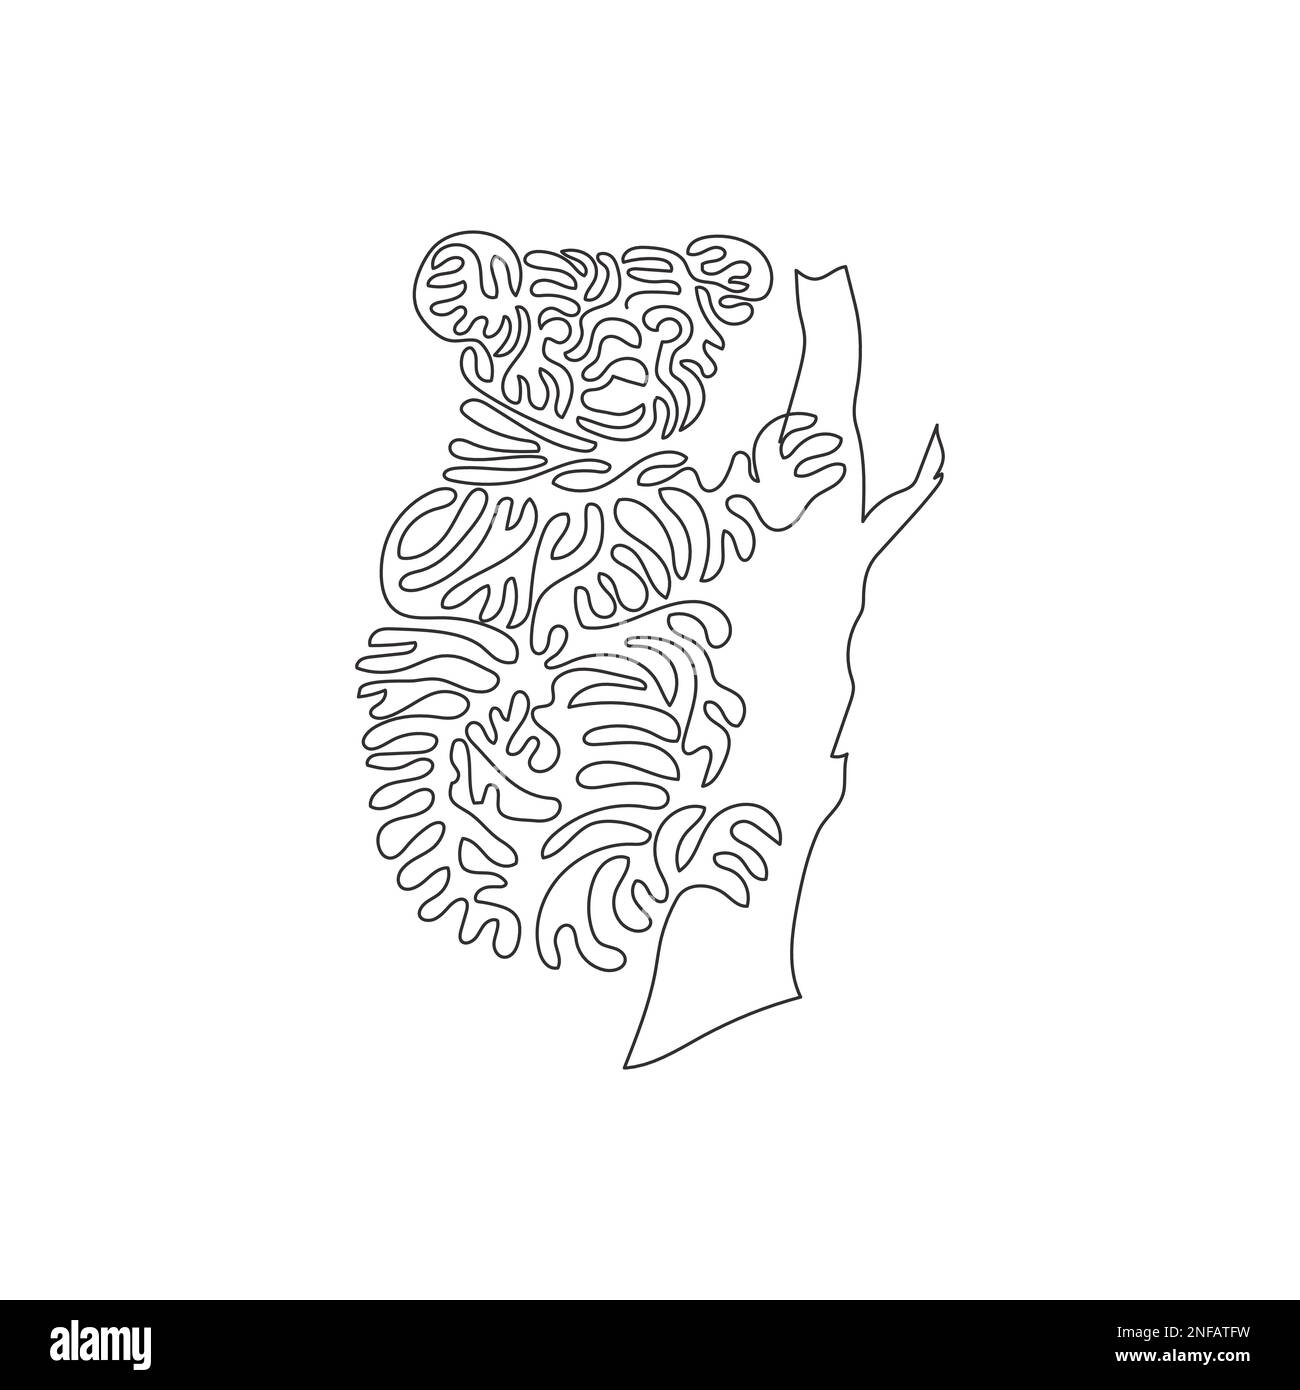 Single curly line drawing of cute koala abstract art. Continuous line drawing design vector illustration of a koala is a tree-dwelling Stock Vector